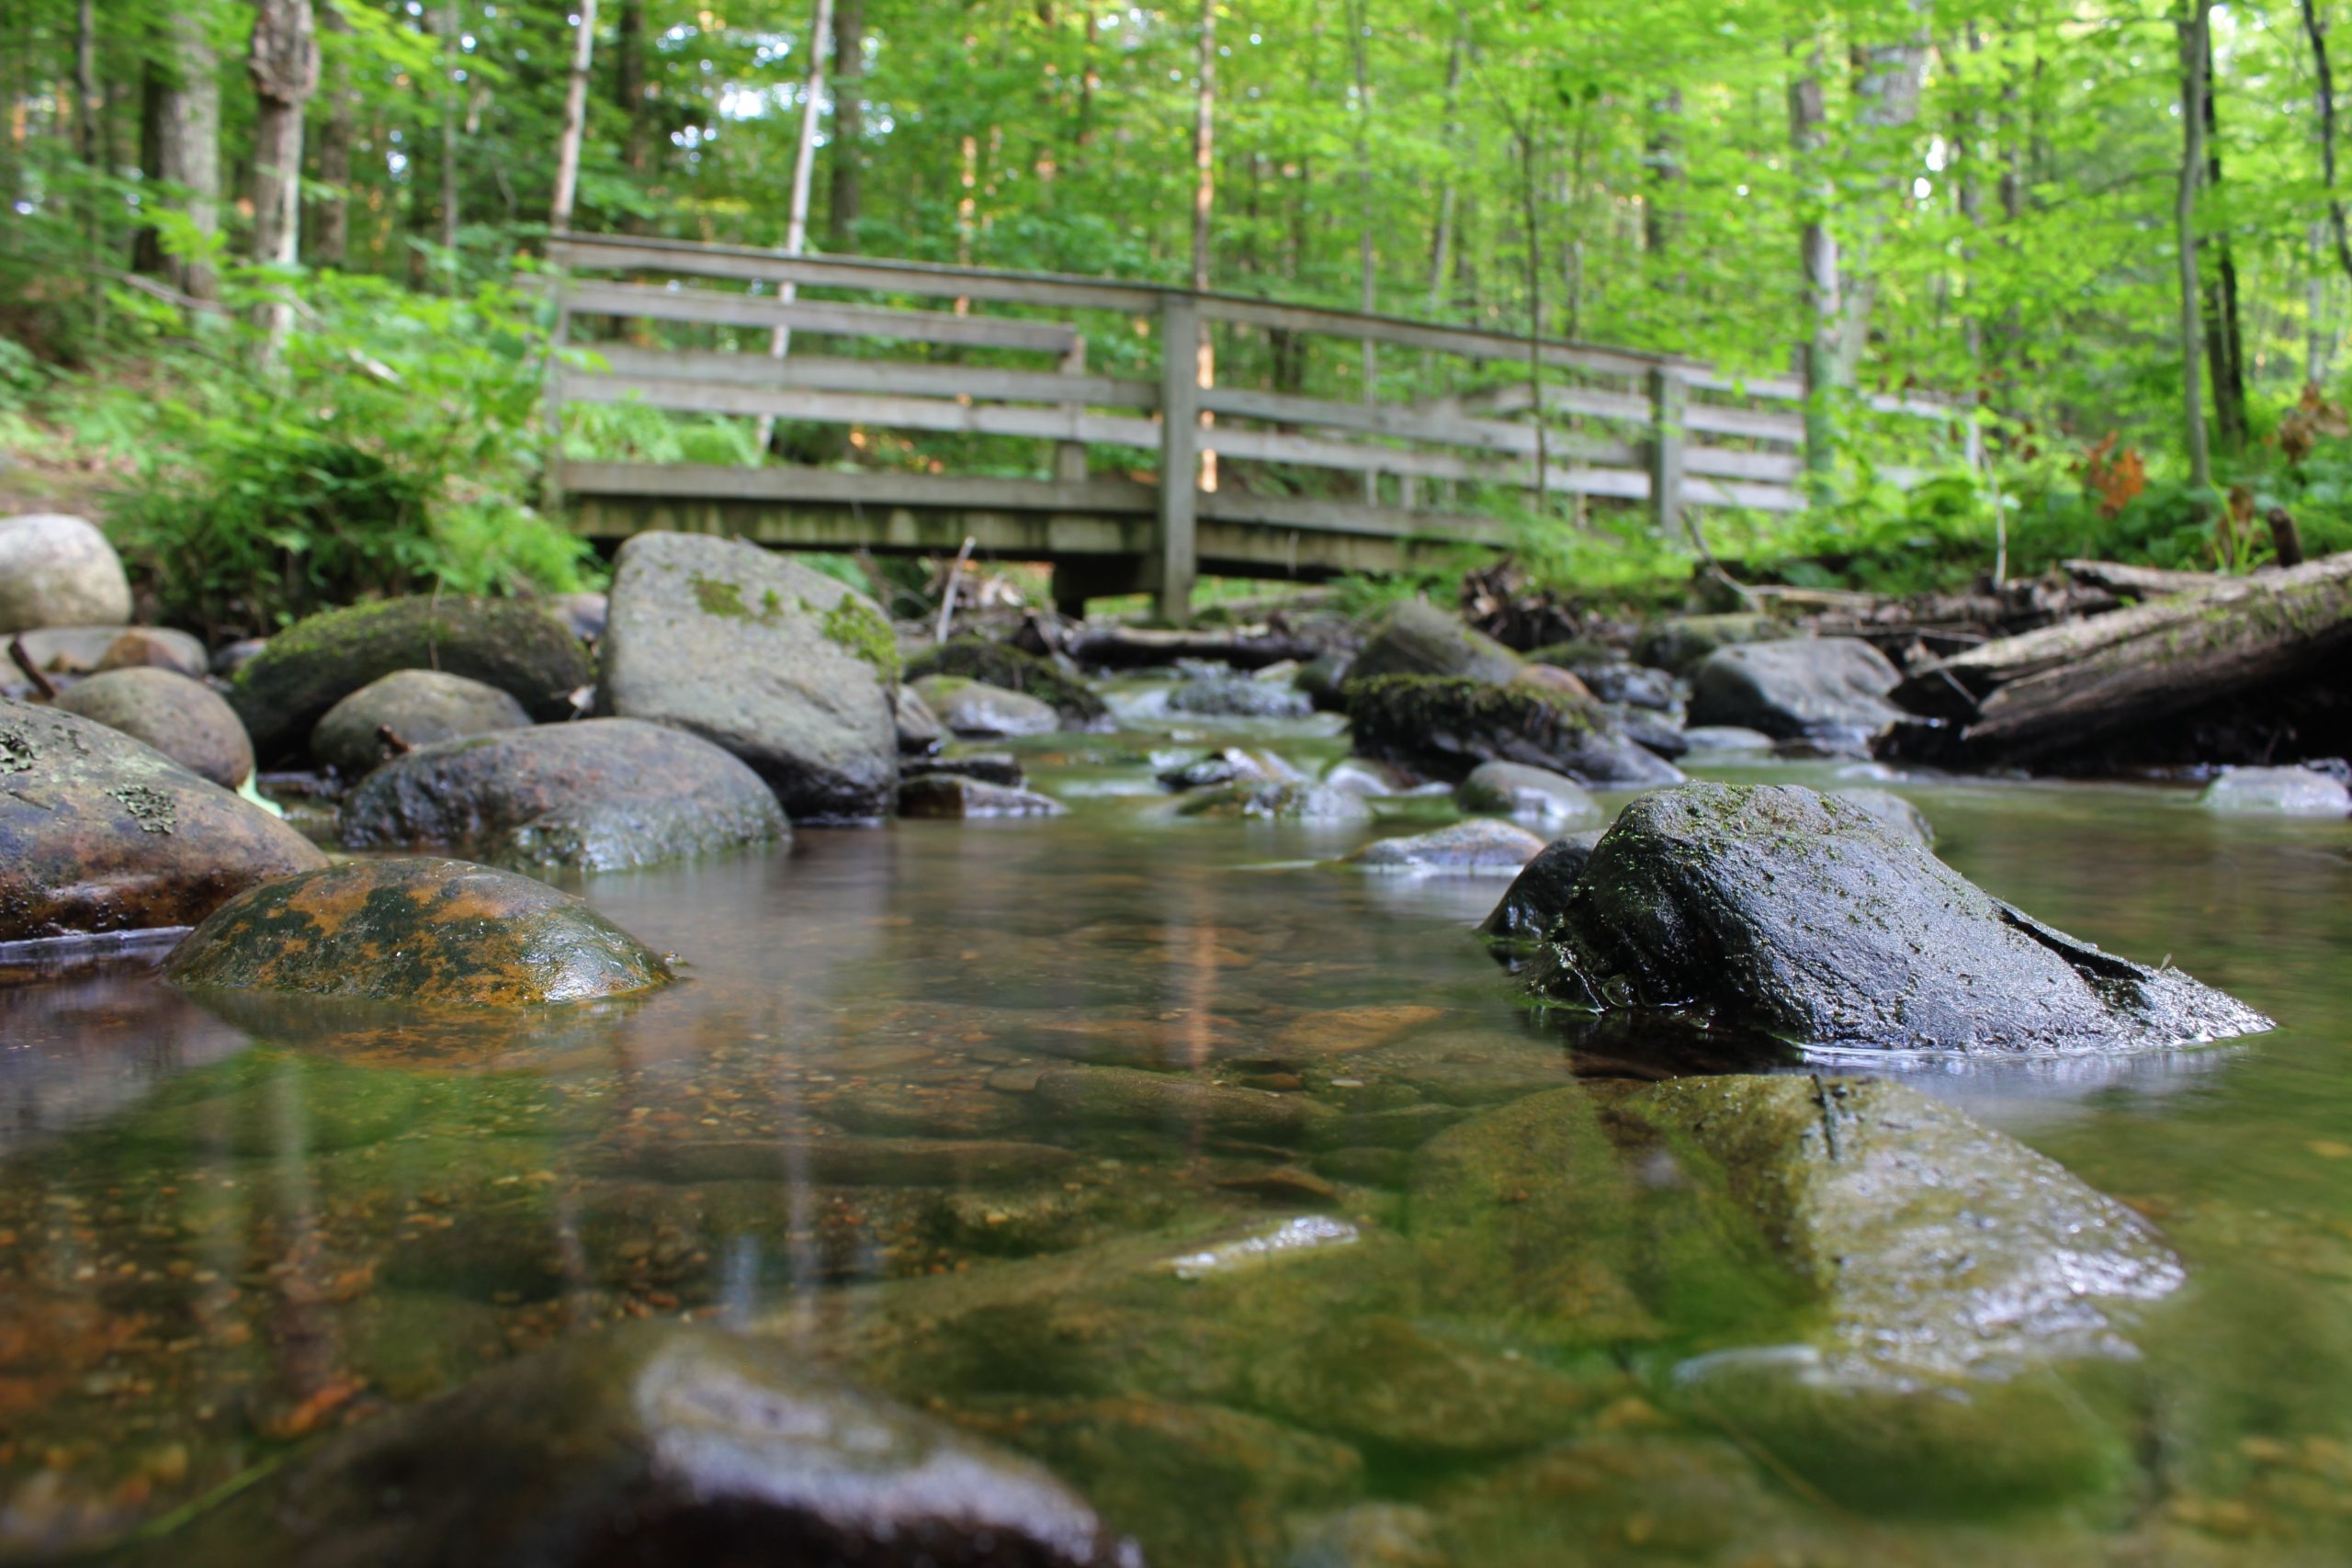 Summer Discovery Hikes in Partnership with Wilton Wildlife Preserve & Park